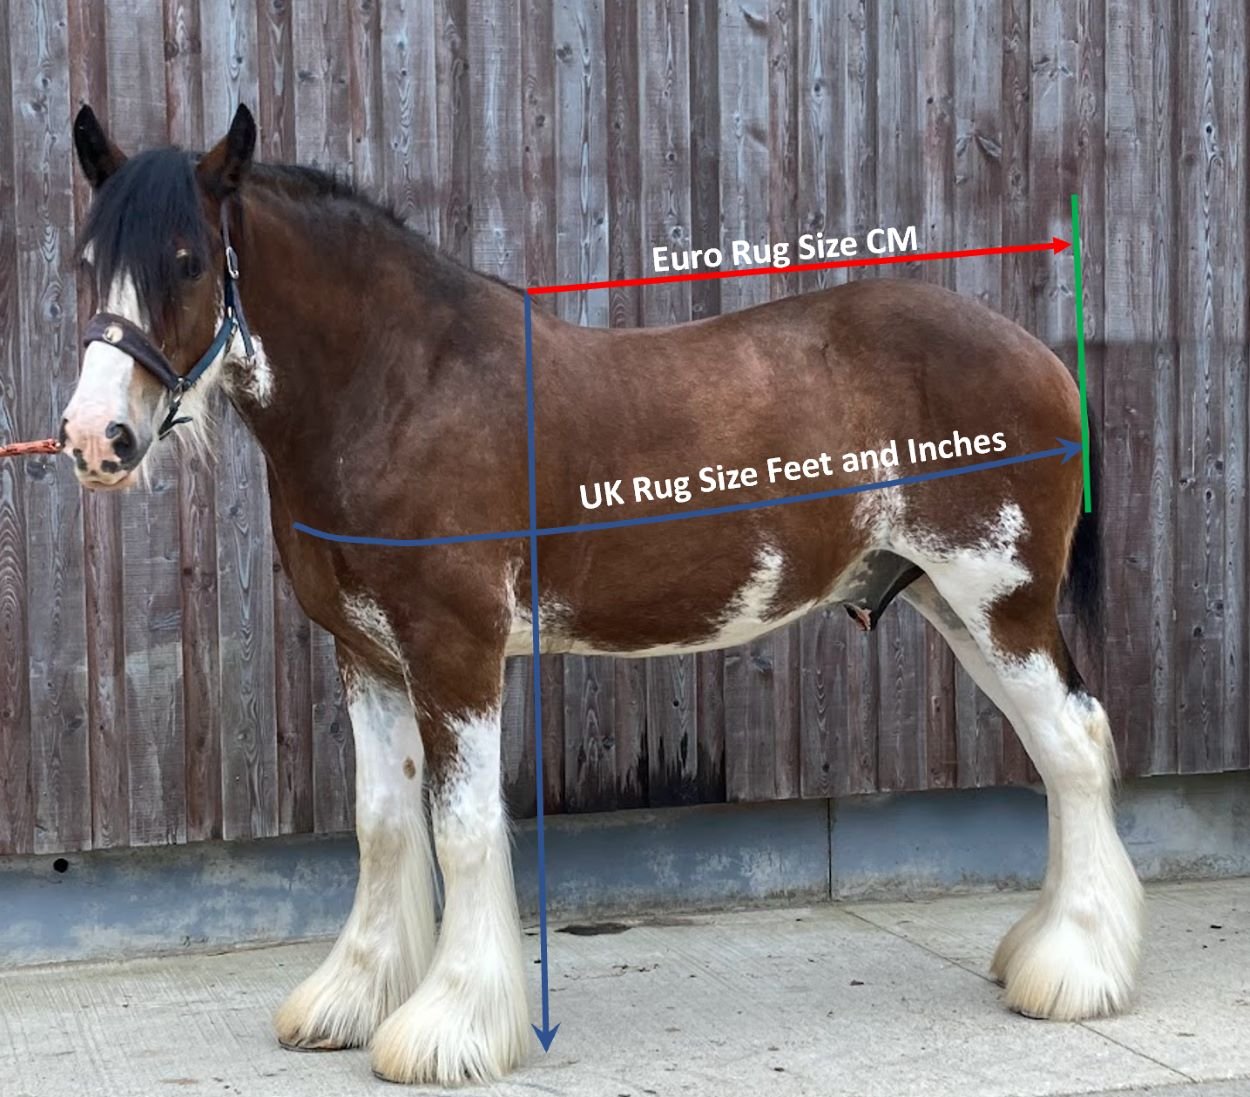 How to measure a horse for a rug or blanket